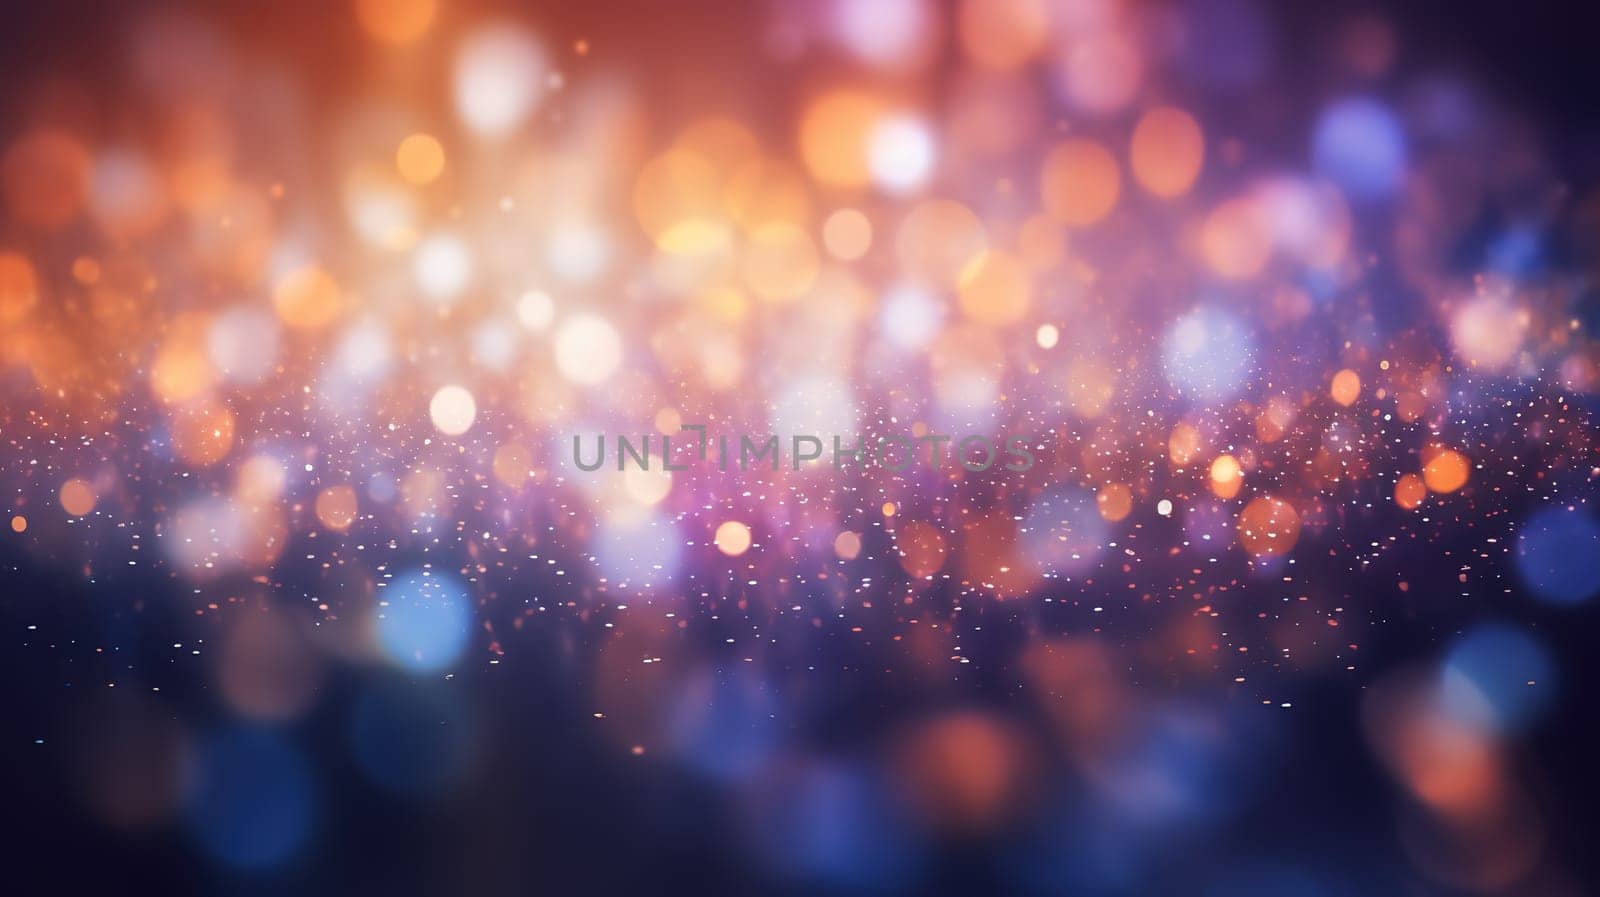 Blurred glowing sparkling with colorful lights and effects by Kadula